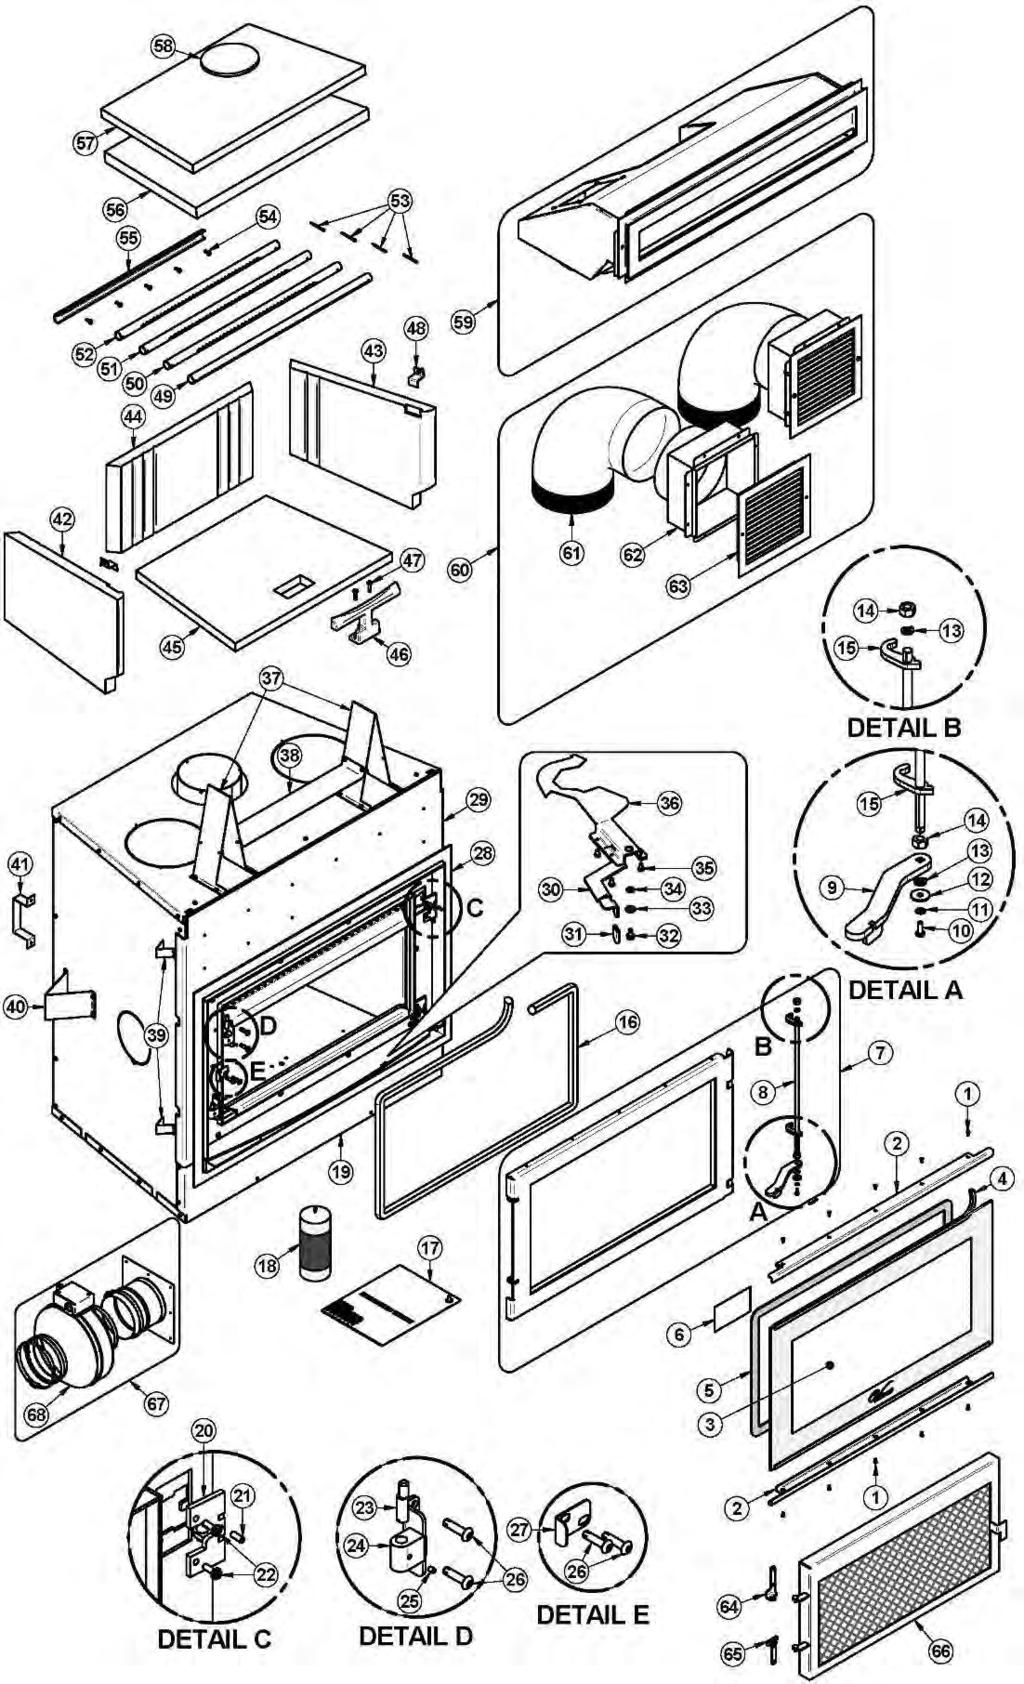 APPENDIX 6: EXPLODED DIAGRAM AND PARTS LIST 64